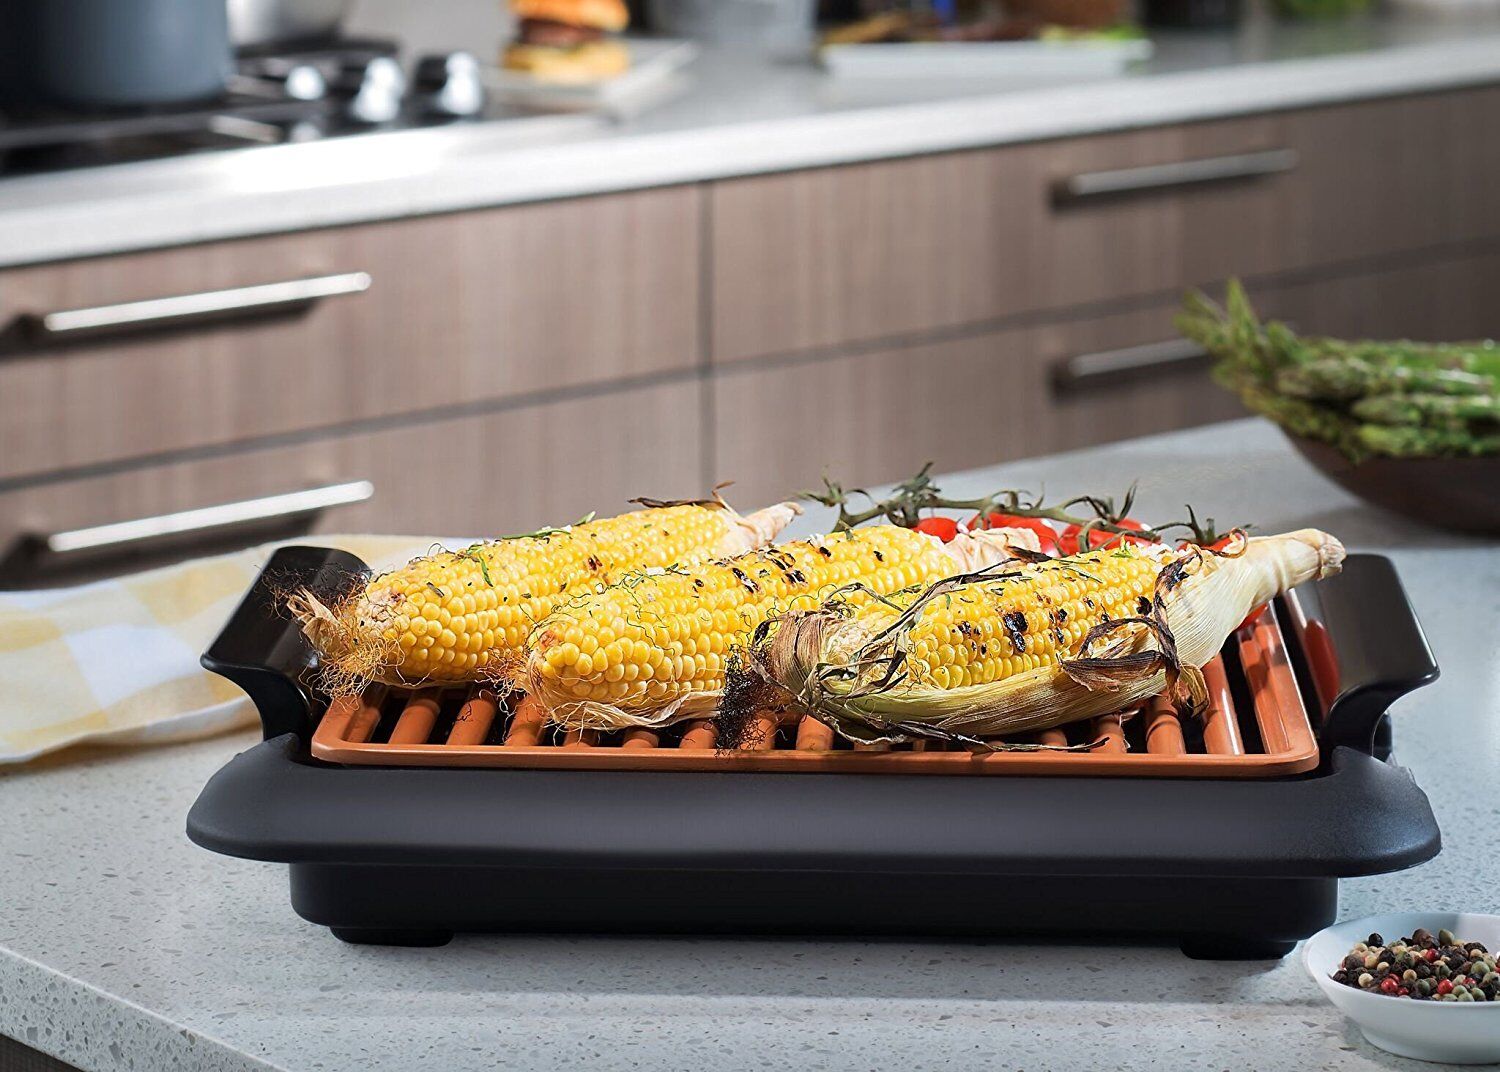 Gotham Steel Copper Non-stick Indoor Electric Smokeless Grill